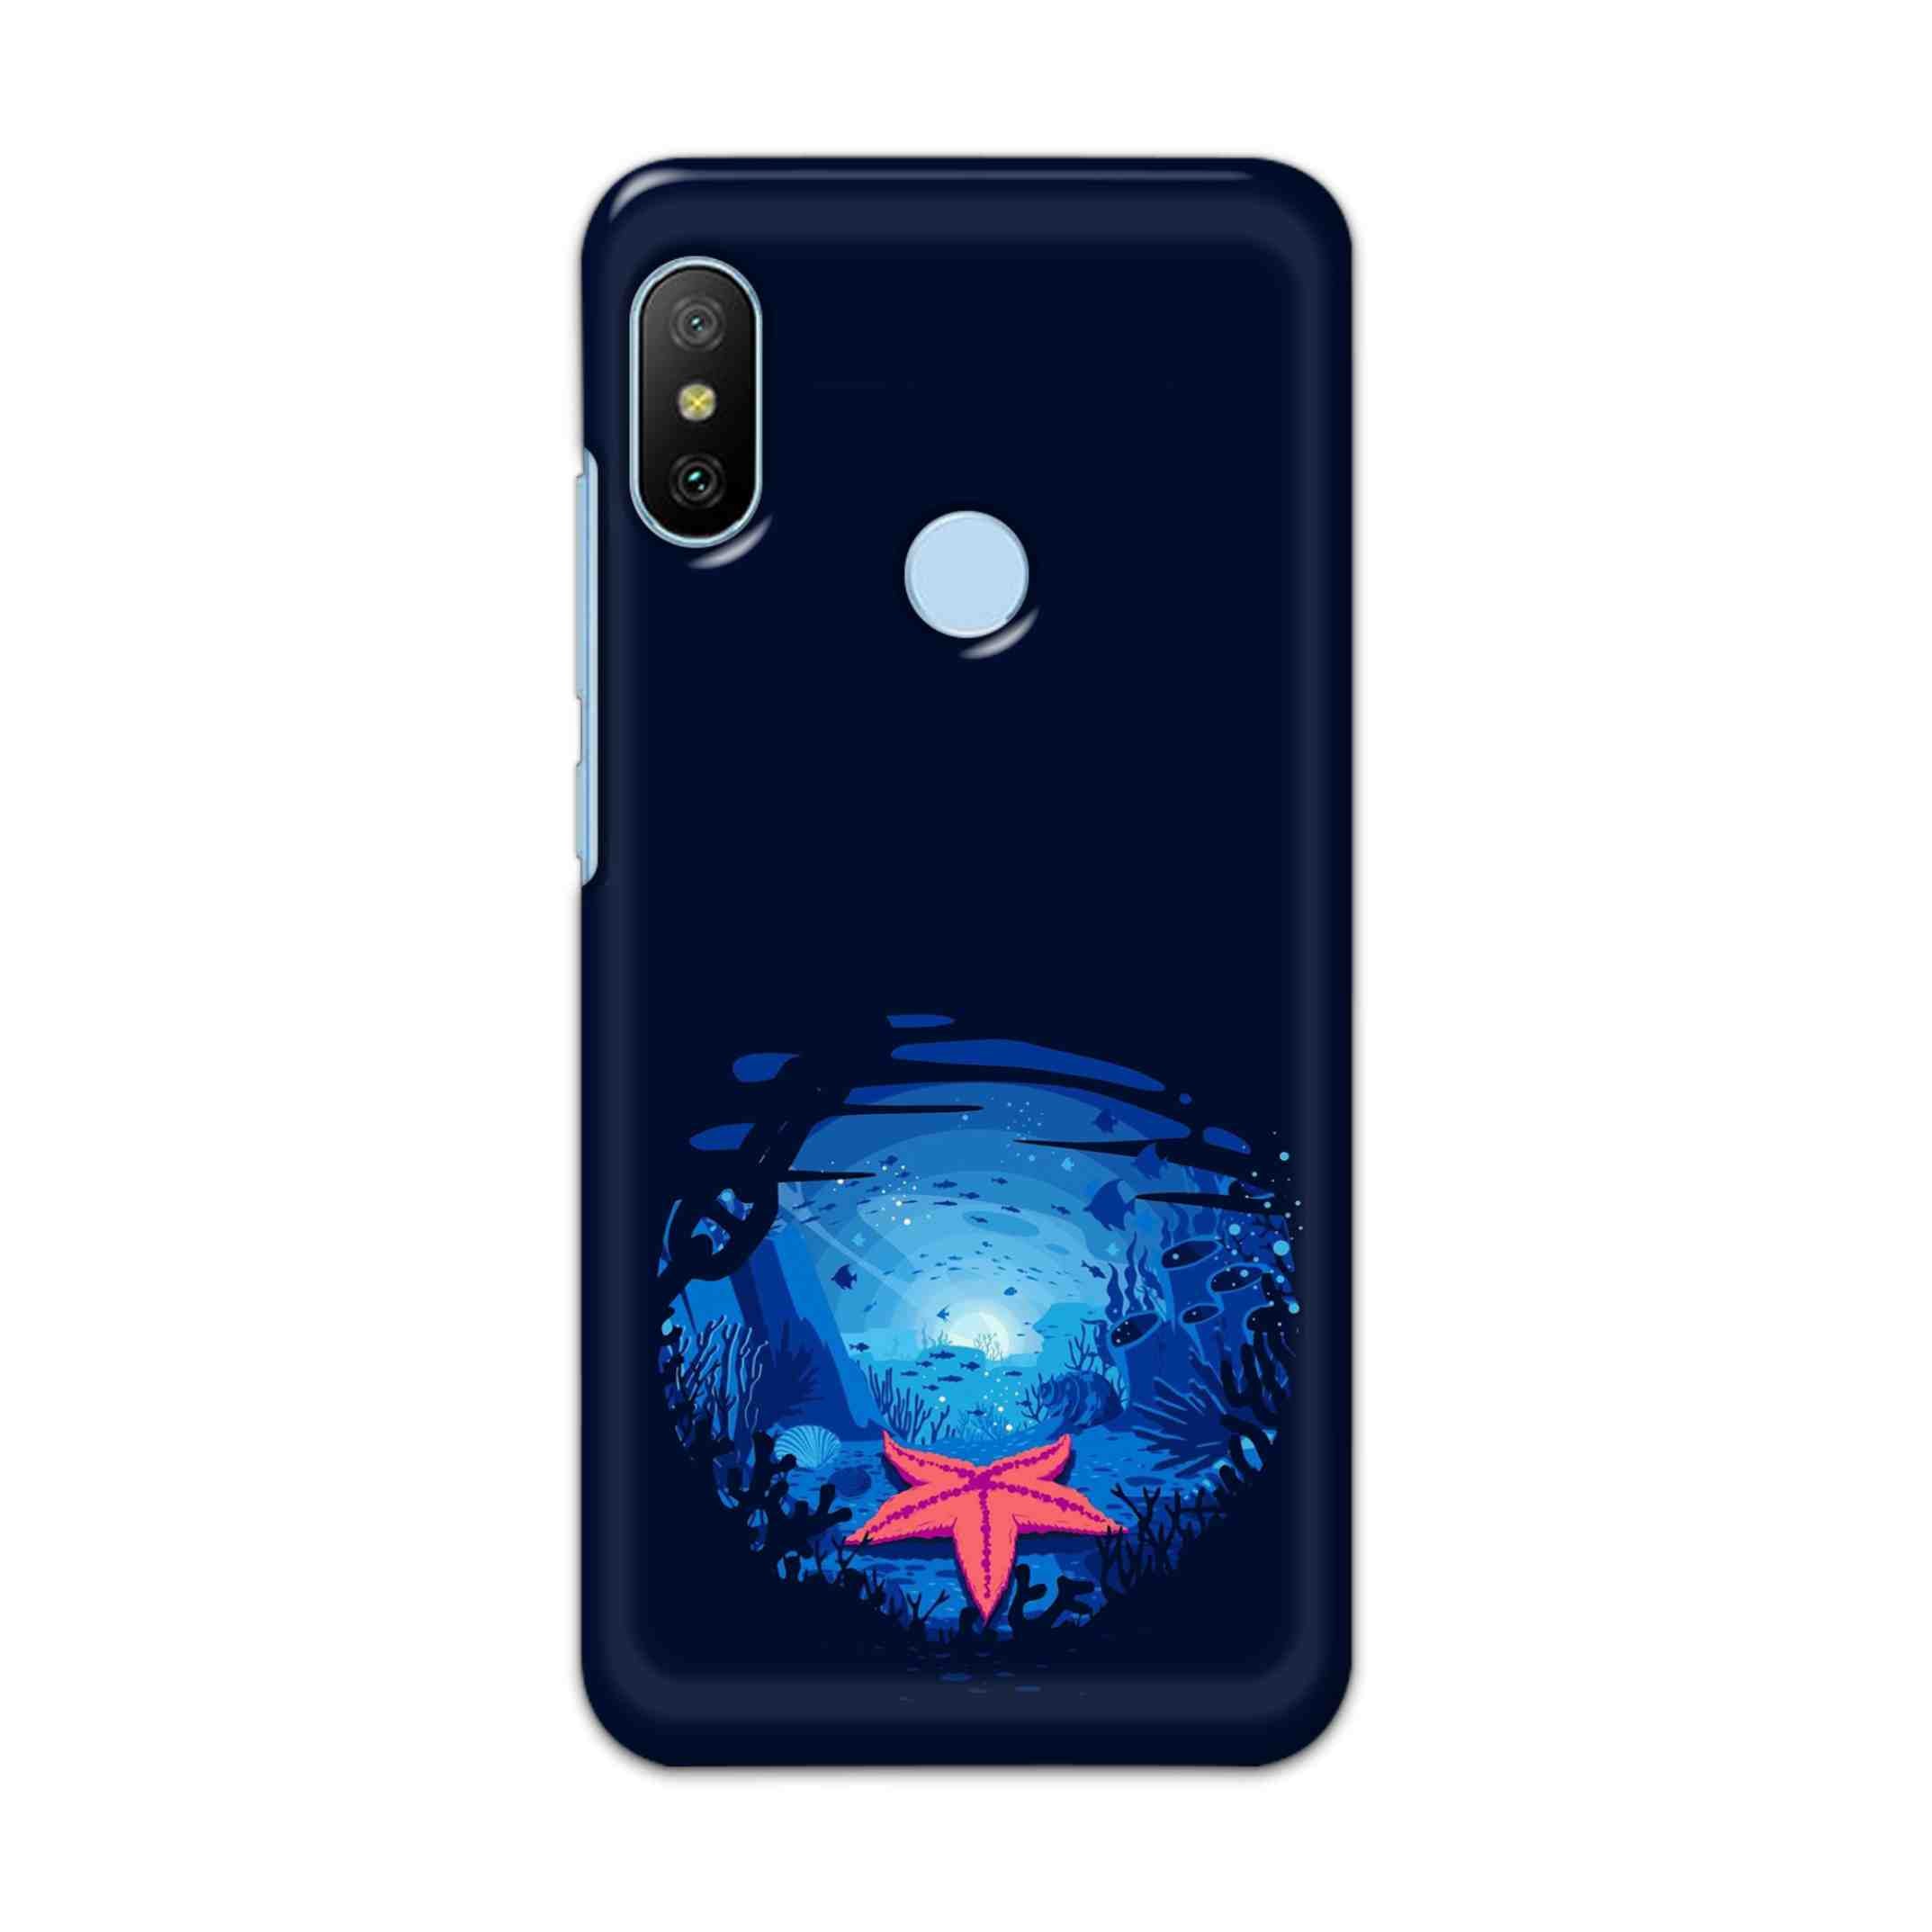 Buy Star Frish Hard Back Mobile Phone Case/Cover For Xiaomi Redmi 6 Pro Online